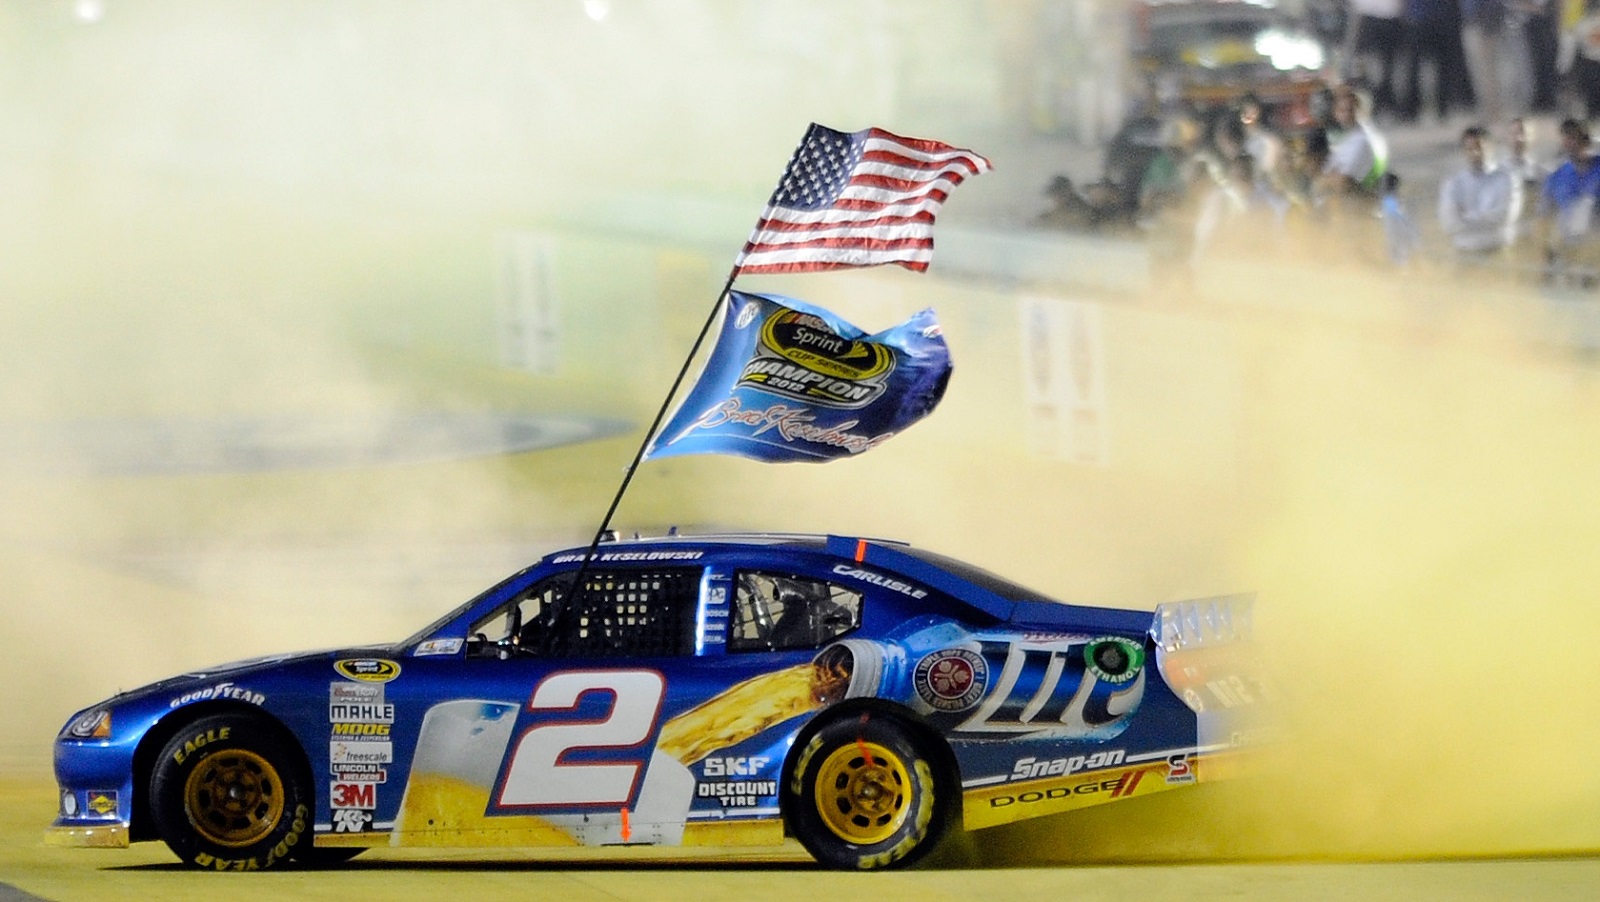 Brad Keselowski of Team Penske celebrates with a burnout after winning the season championship at Homestead-Miami Speedway on Nov. 18, 2012, in the final NASCAR Cup Series race for Dodge. | John Harrelson/Getty Images for NASCAR